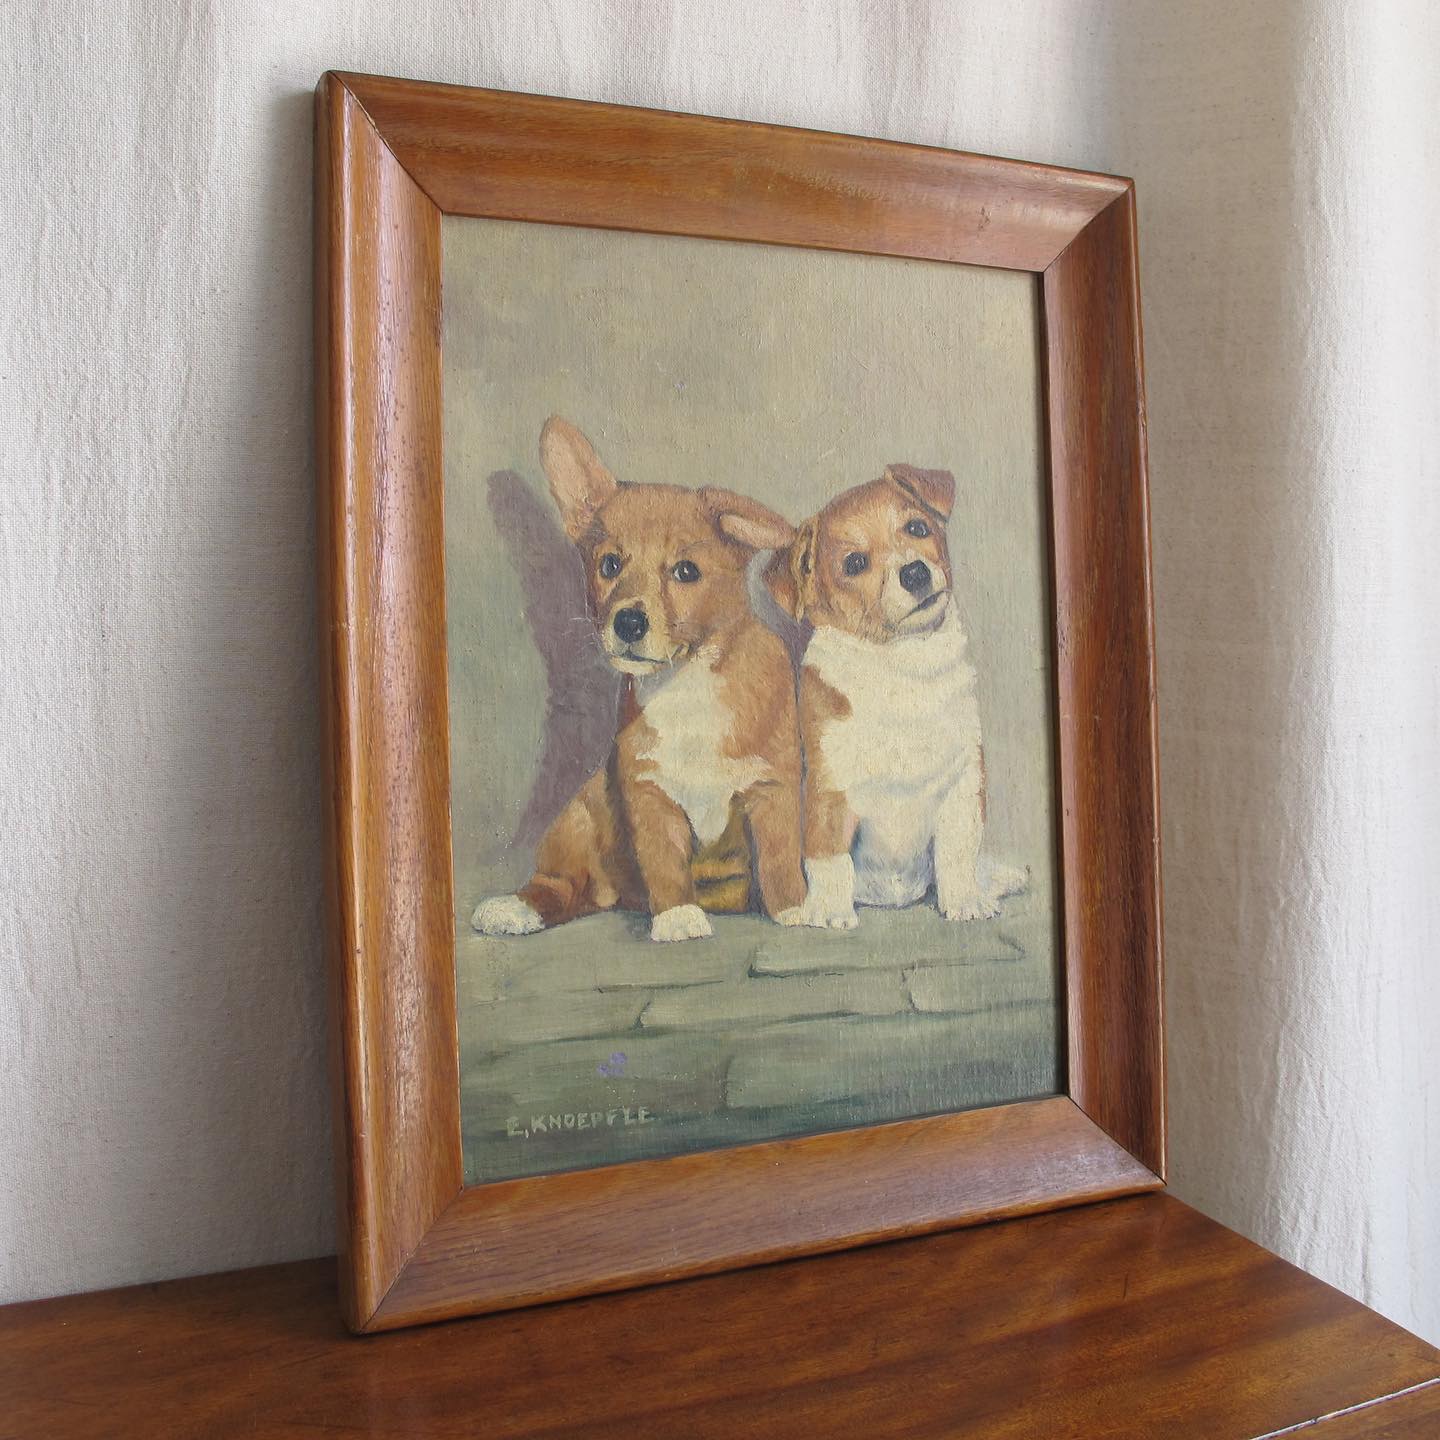 Puppy Dogs Oil on Canvas, one a corgi the other a terrier, artist signed E. KNOEPFLE, c. 1940